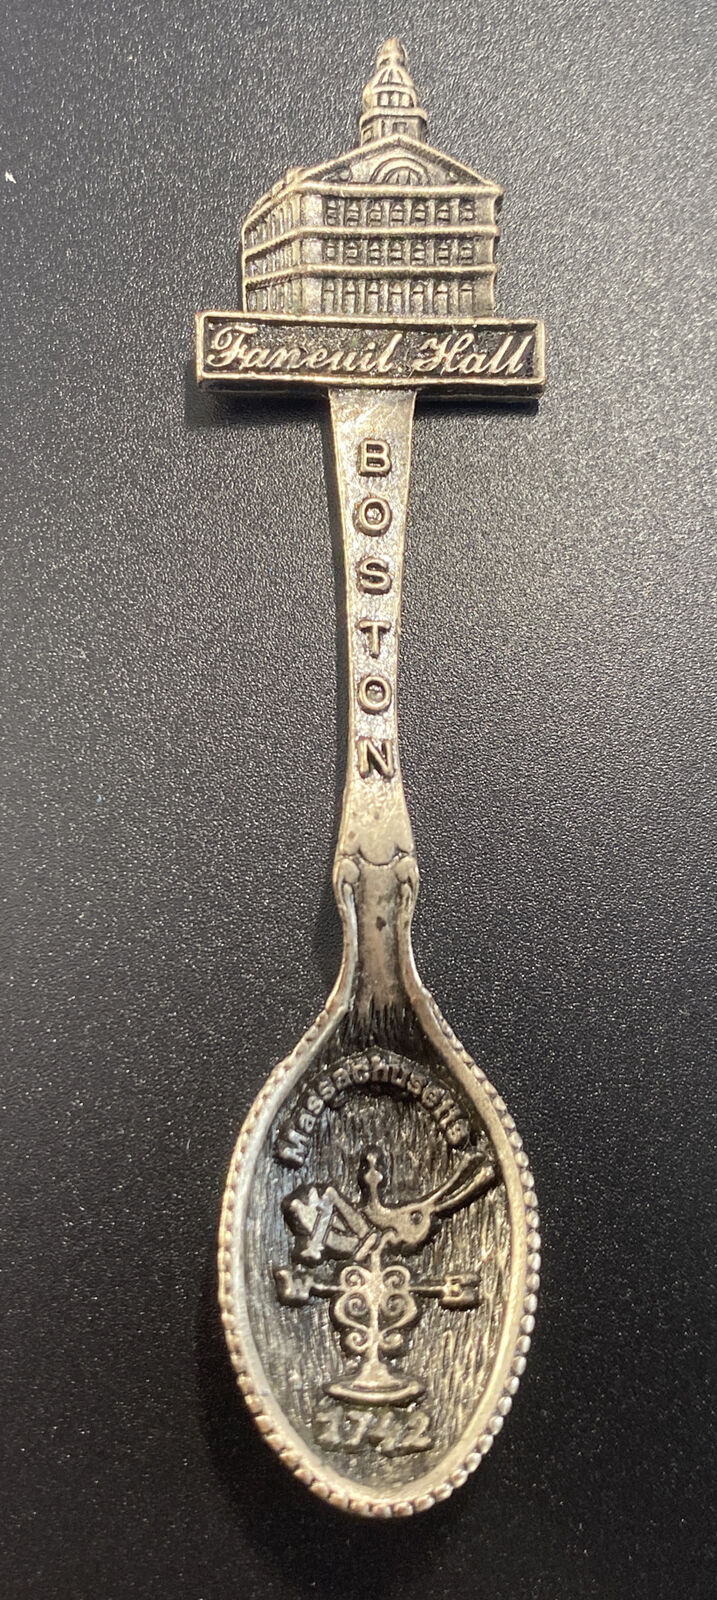 Gish Faneuil Hall Collectible Spoon Boston Massachusetts Signed Vtg Detail 3.5